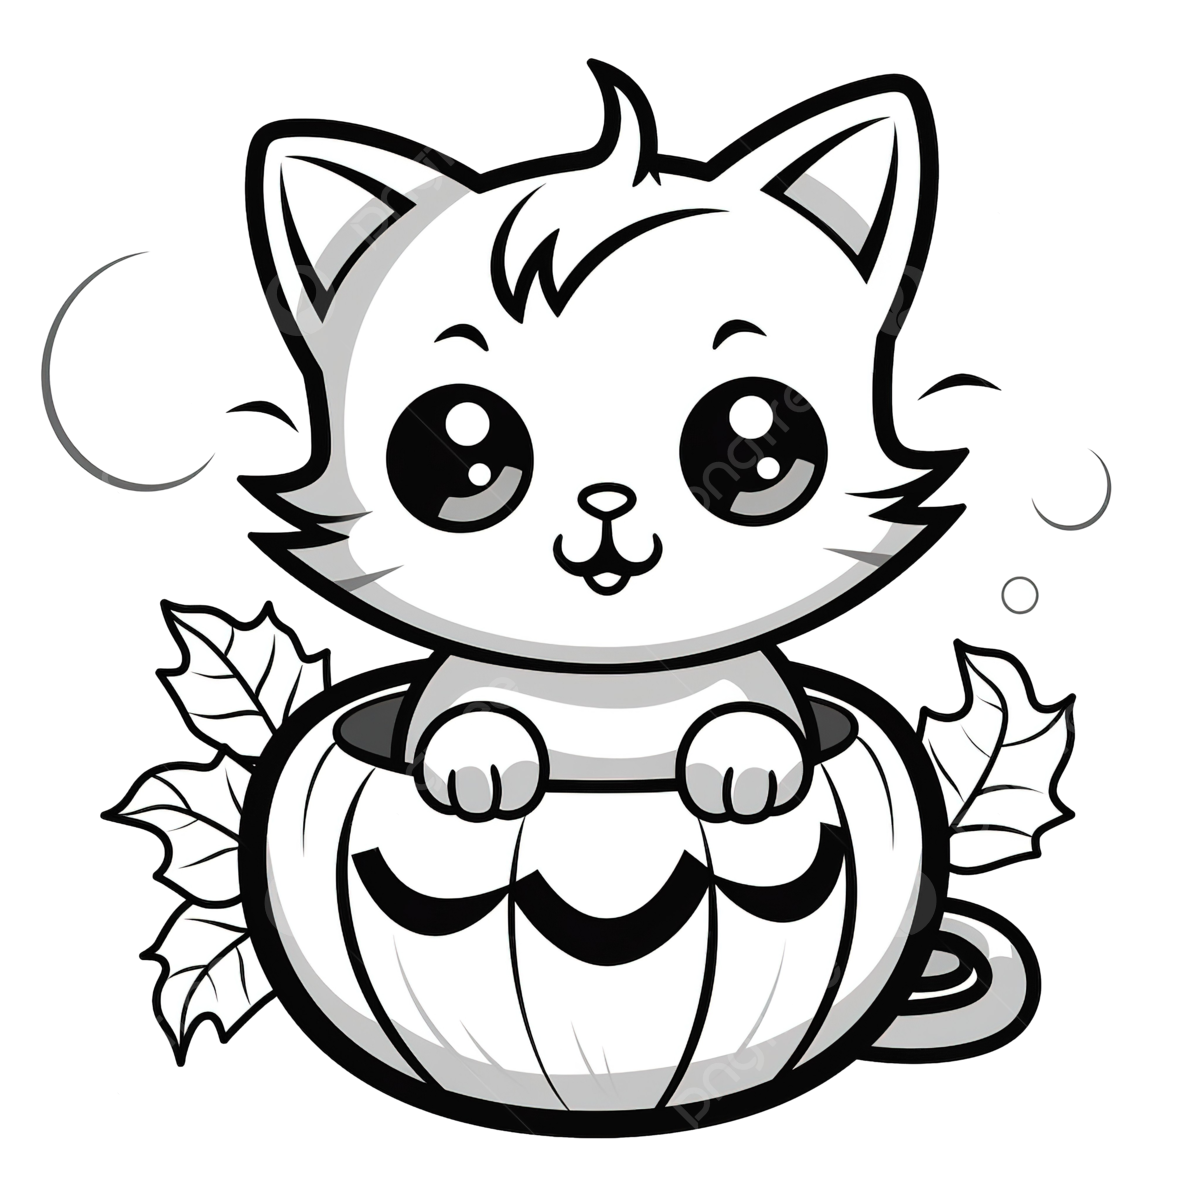 Coloring book with a cute black cat in the halloween pumpkin cat drawing pumpkin drawing book drawing png transparent image and clipart for free download